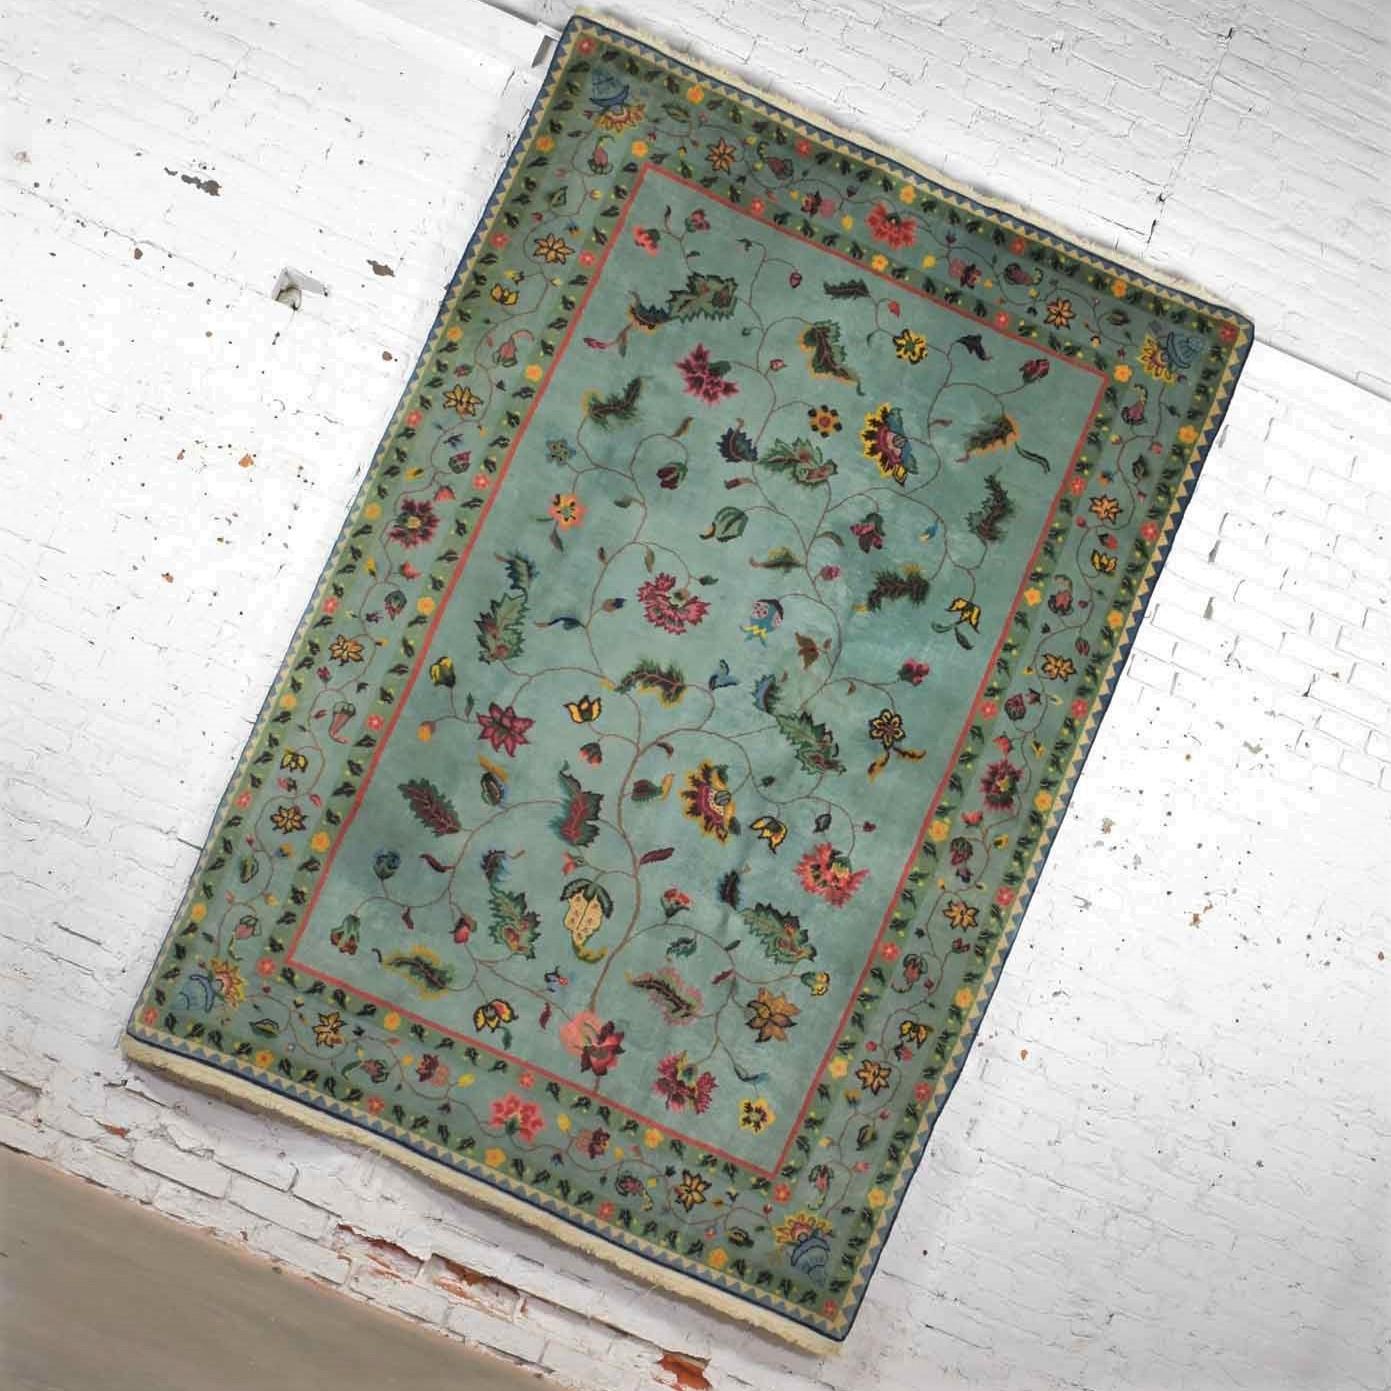 Handsome vintage wool 6’ x 8.9’ handmade Chinese Peking rug in a gorgeous soft teal green with border design and overall center pattern it is in fabulous vintage condition. We have cleaned the rug thoroughly but there may still be small stains but